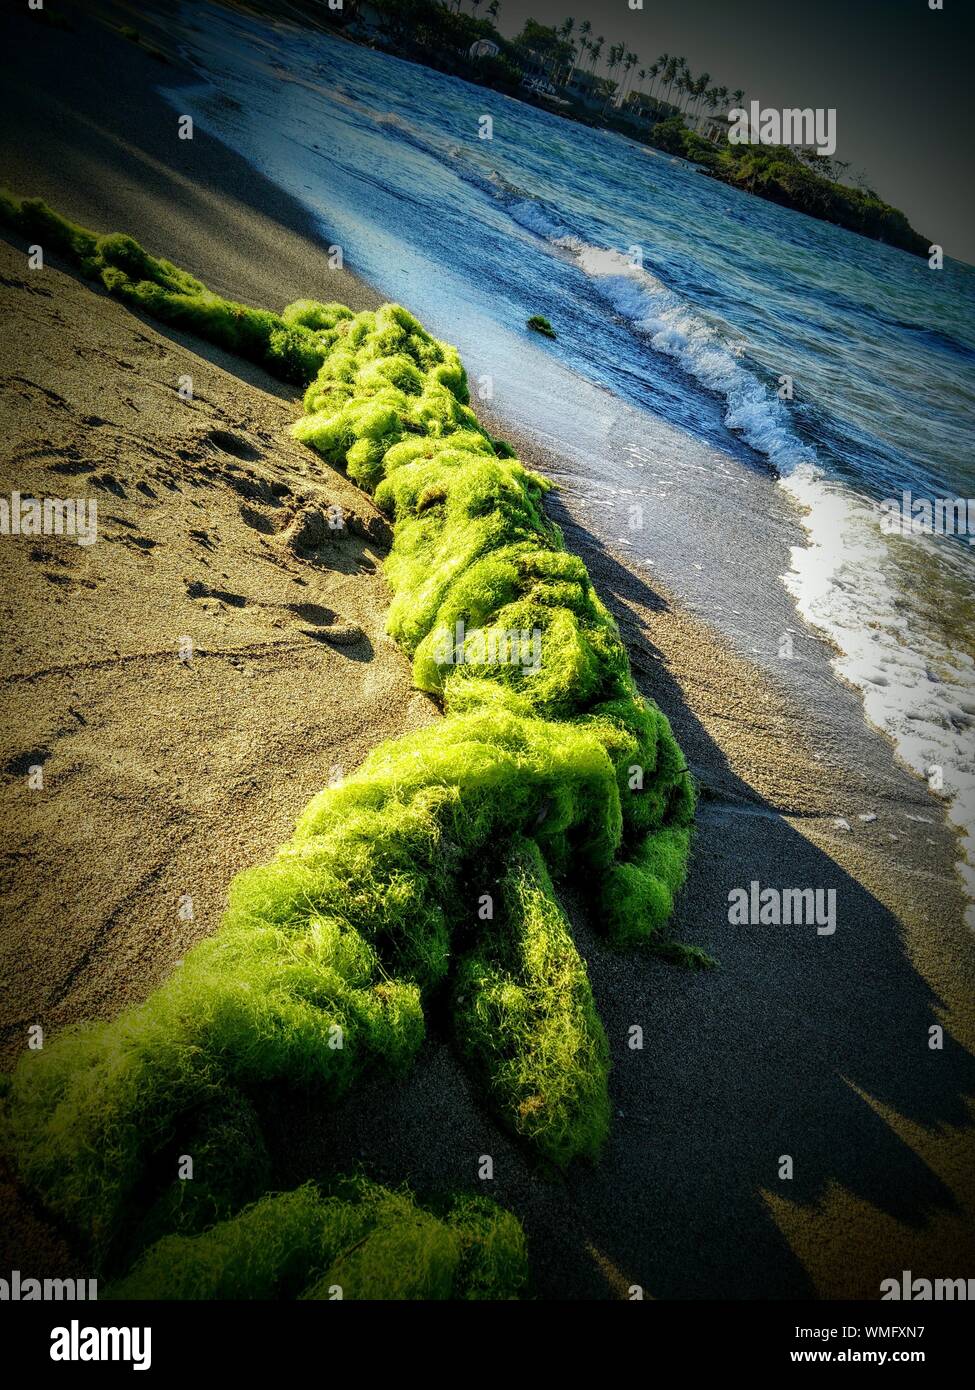 High Angle View Of Green Seaweed On Shore At Beach Stock Photo